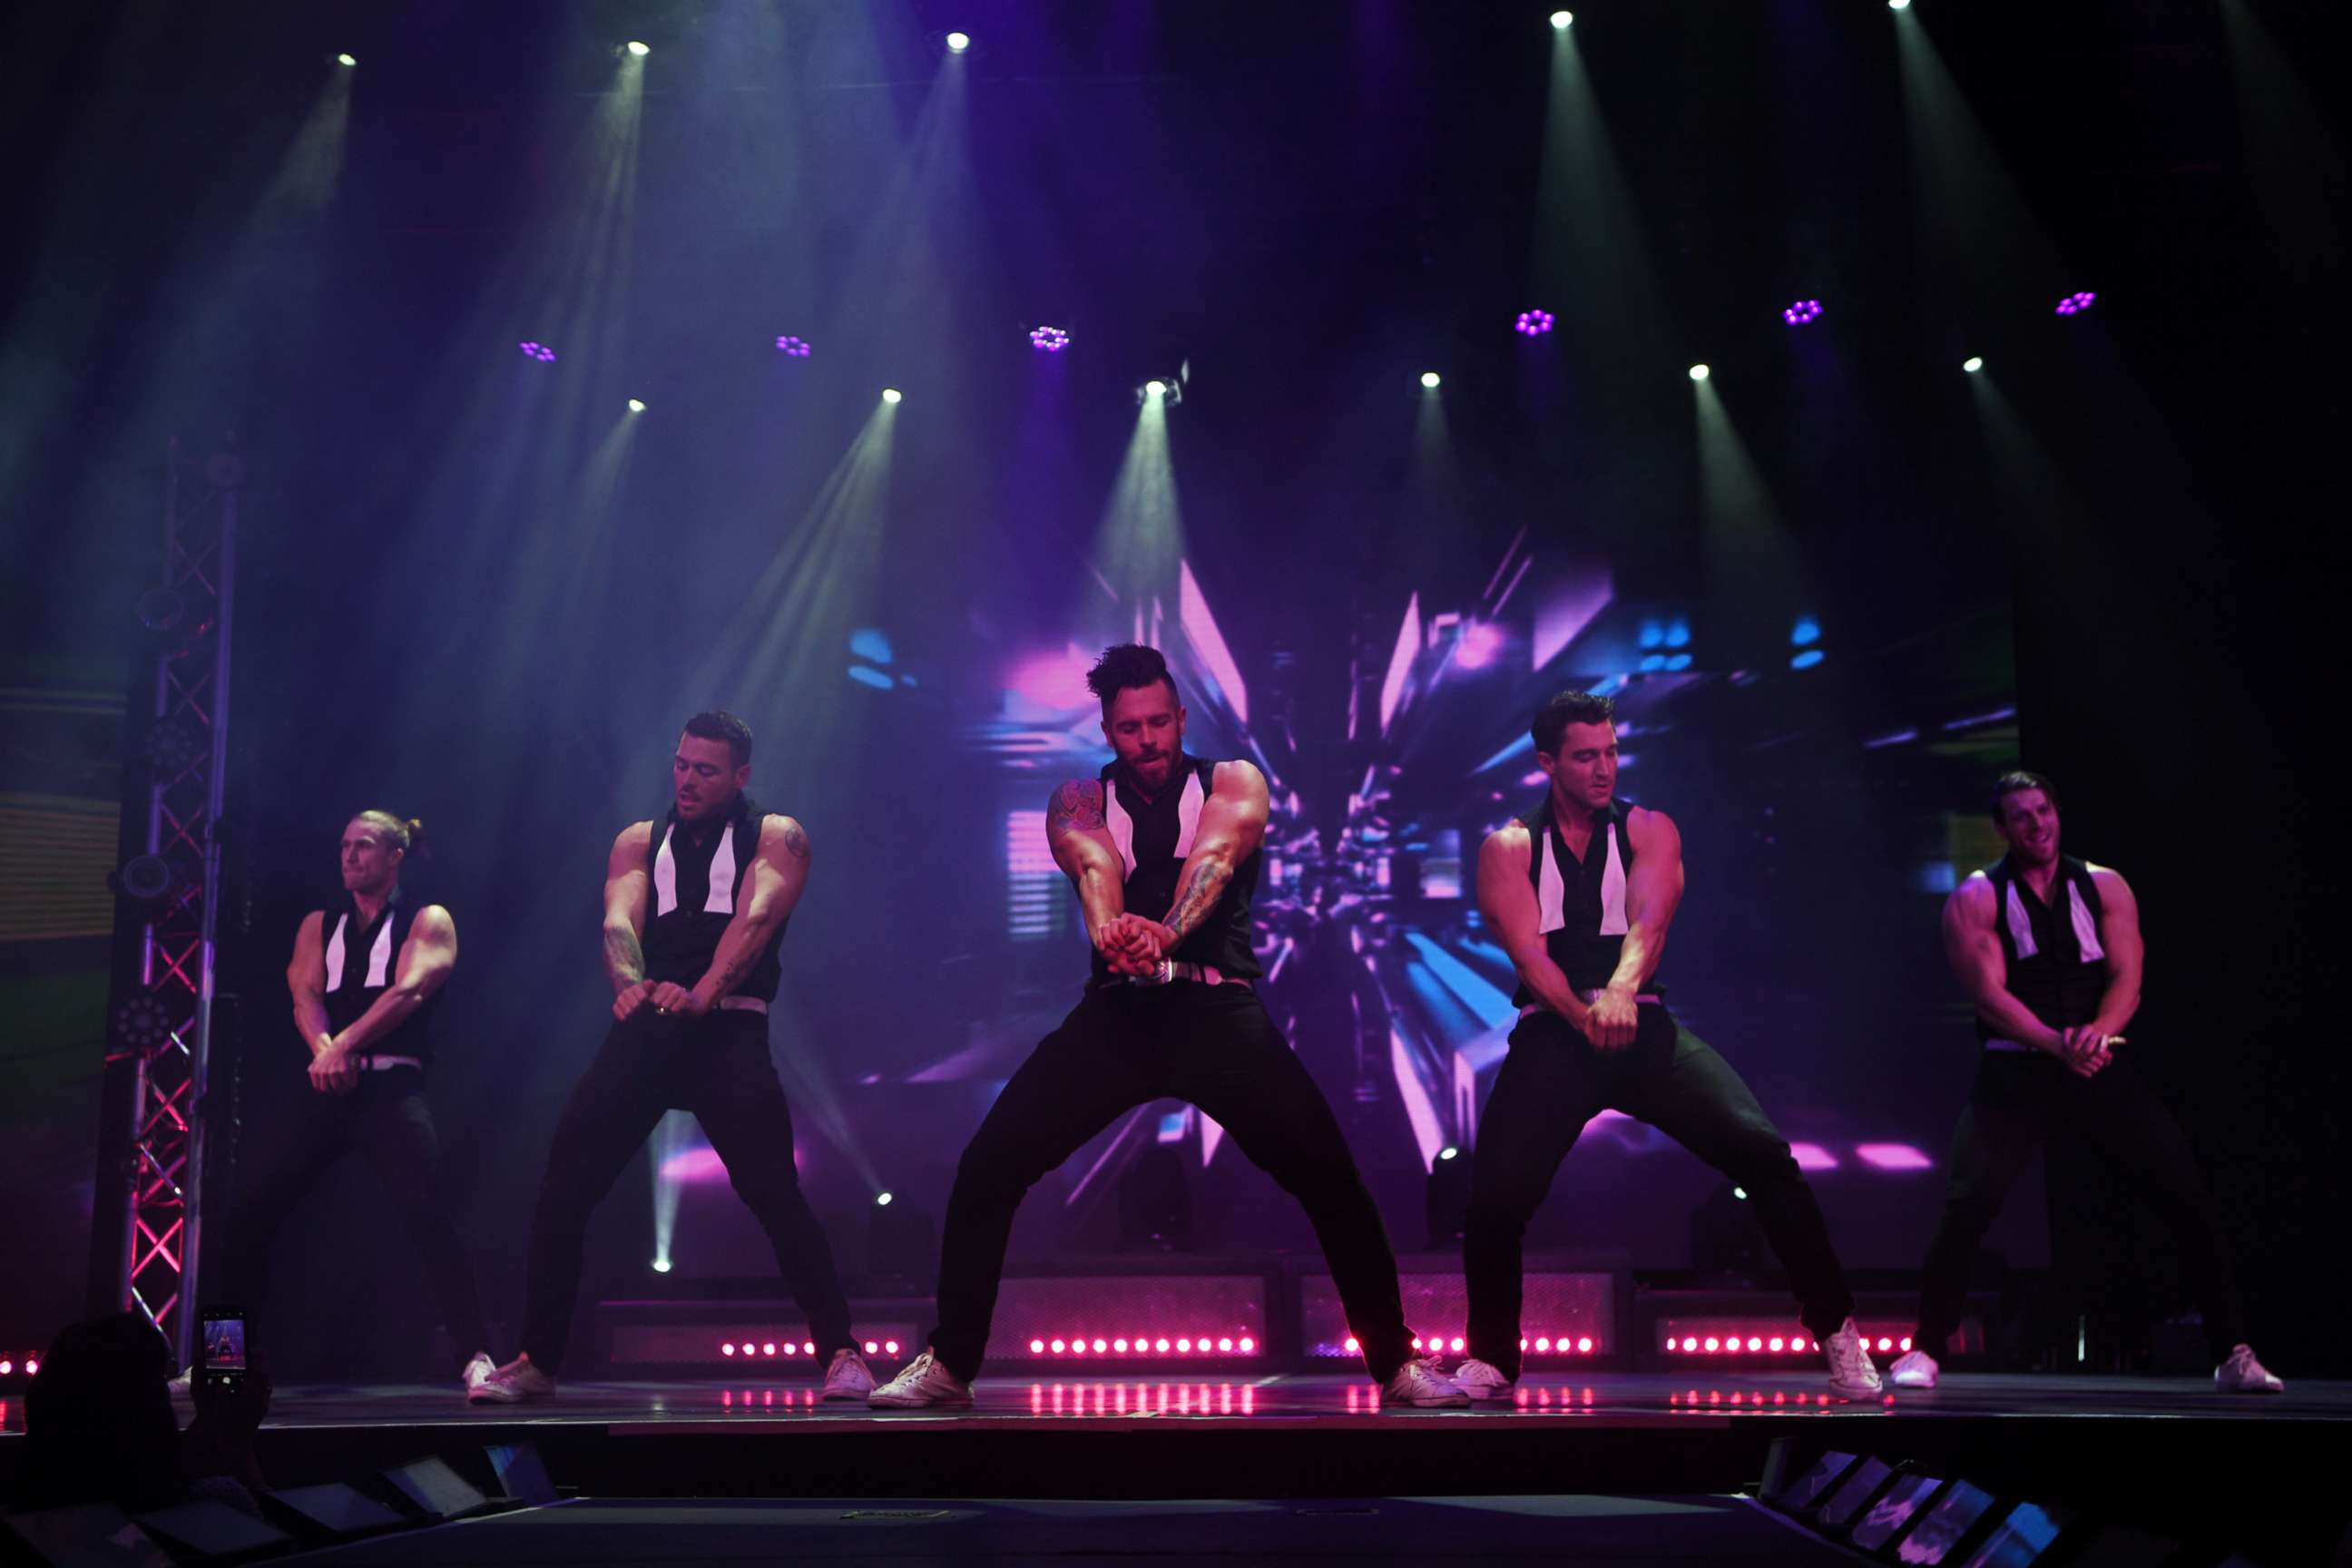 PHOTO: In this Feb. 14, 2020, file photo, a Chippendales show is performed at Rio All-Suite Hotel & Casino in Las Vegas.